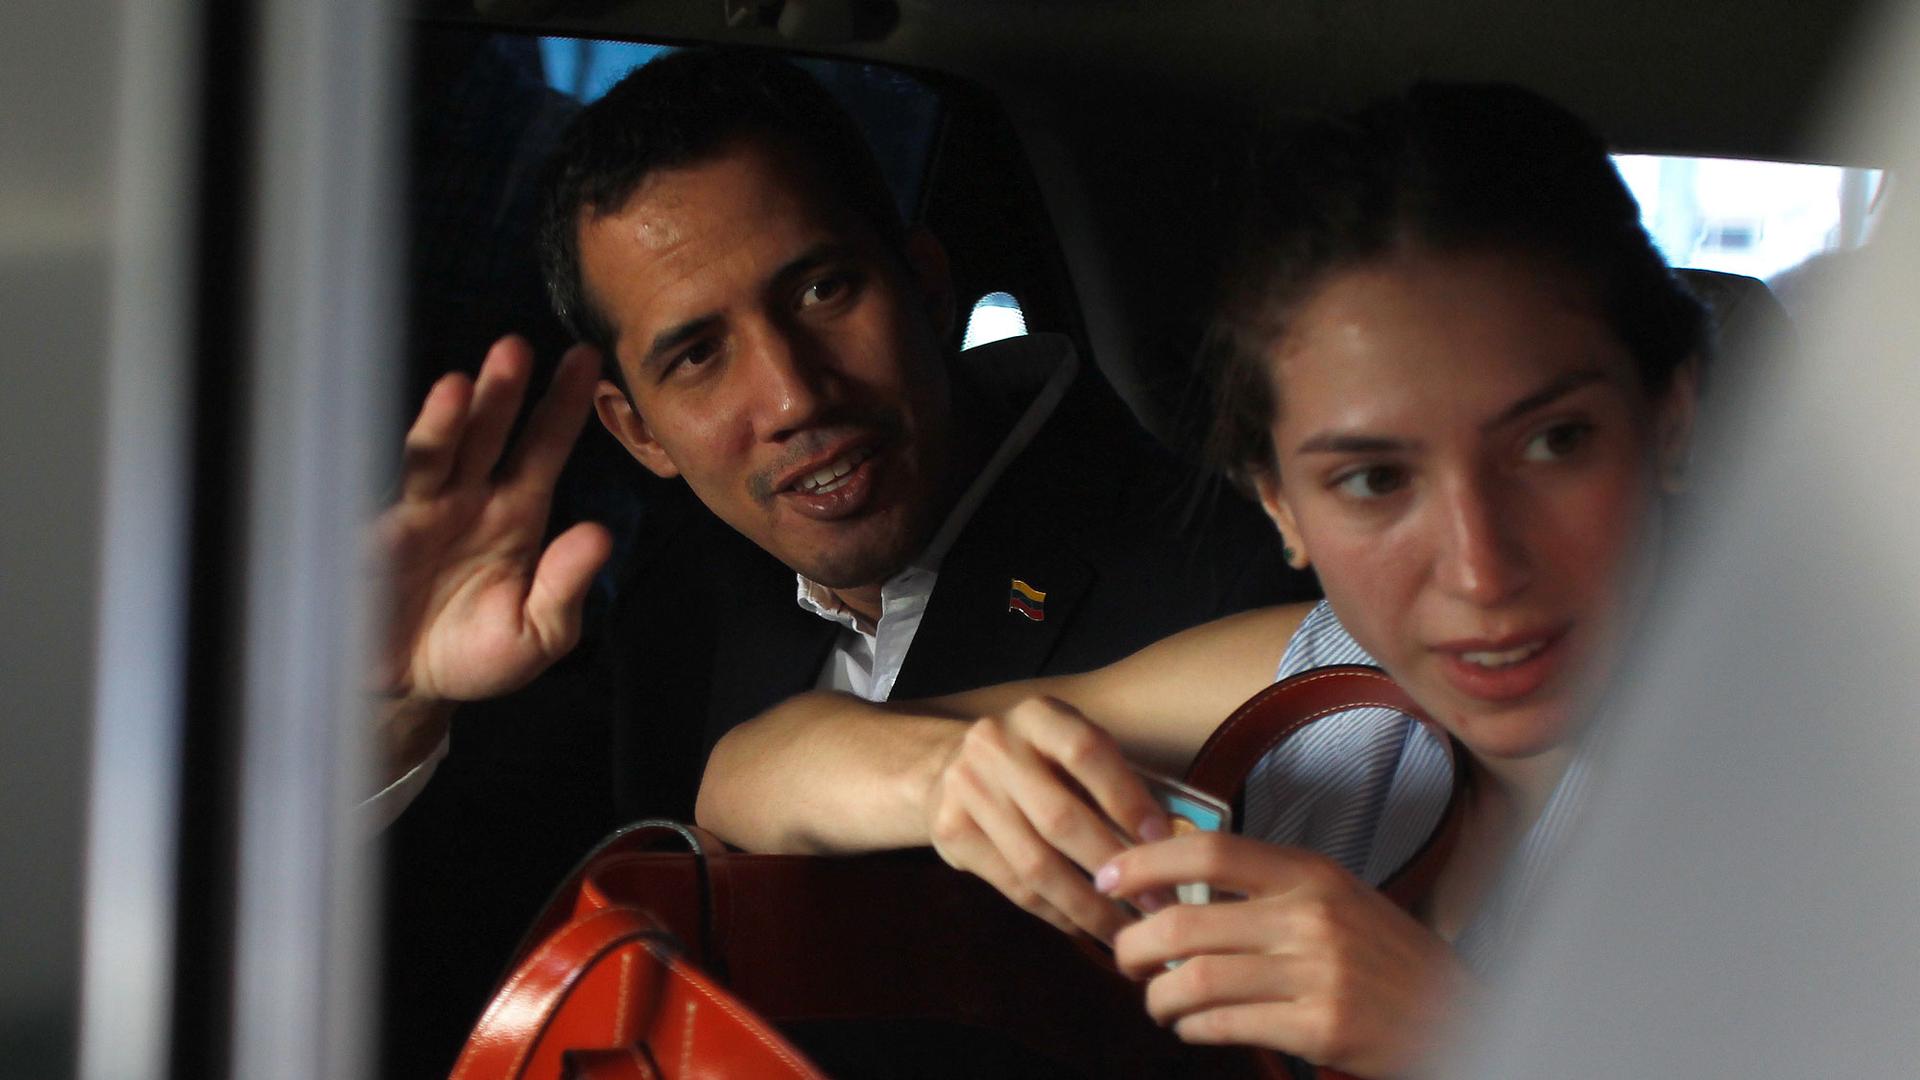 Venezuelan opposition leader Juan Guaidó sits in the back seat of a car next to his wife Fabiana Rosales waving.